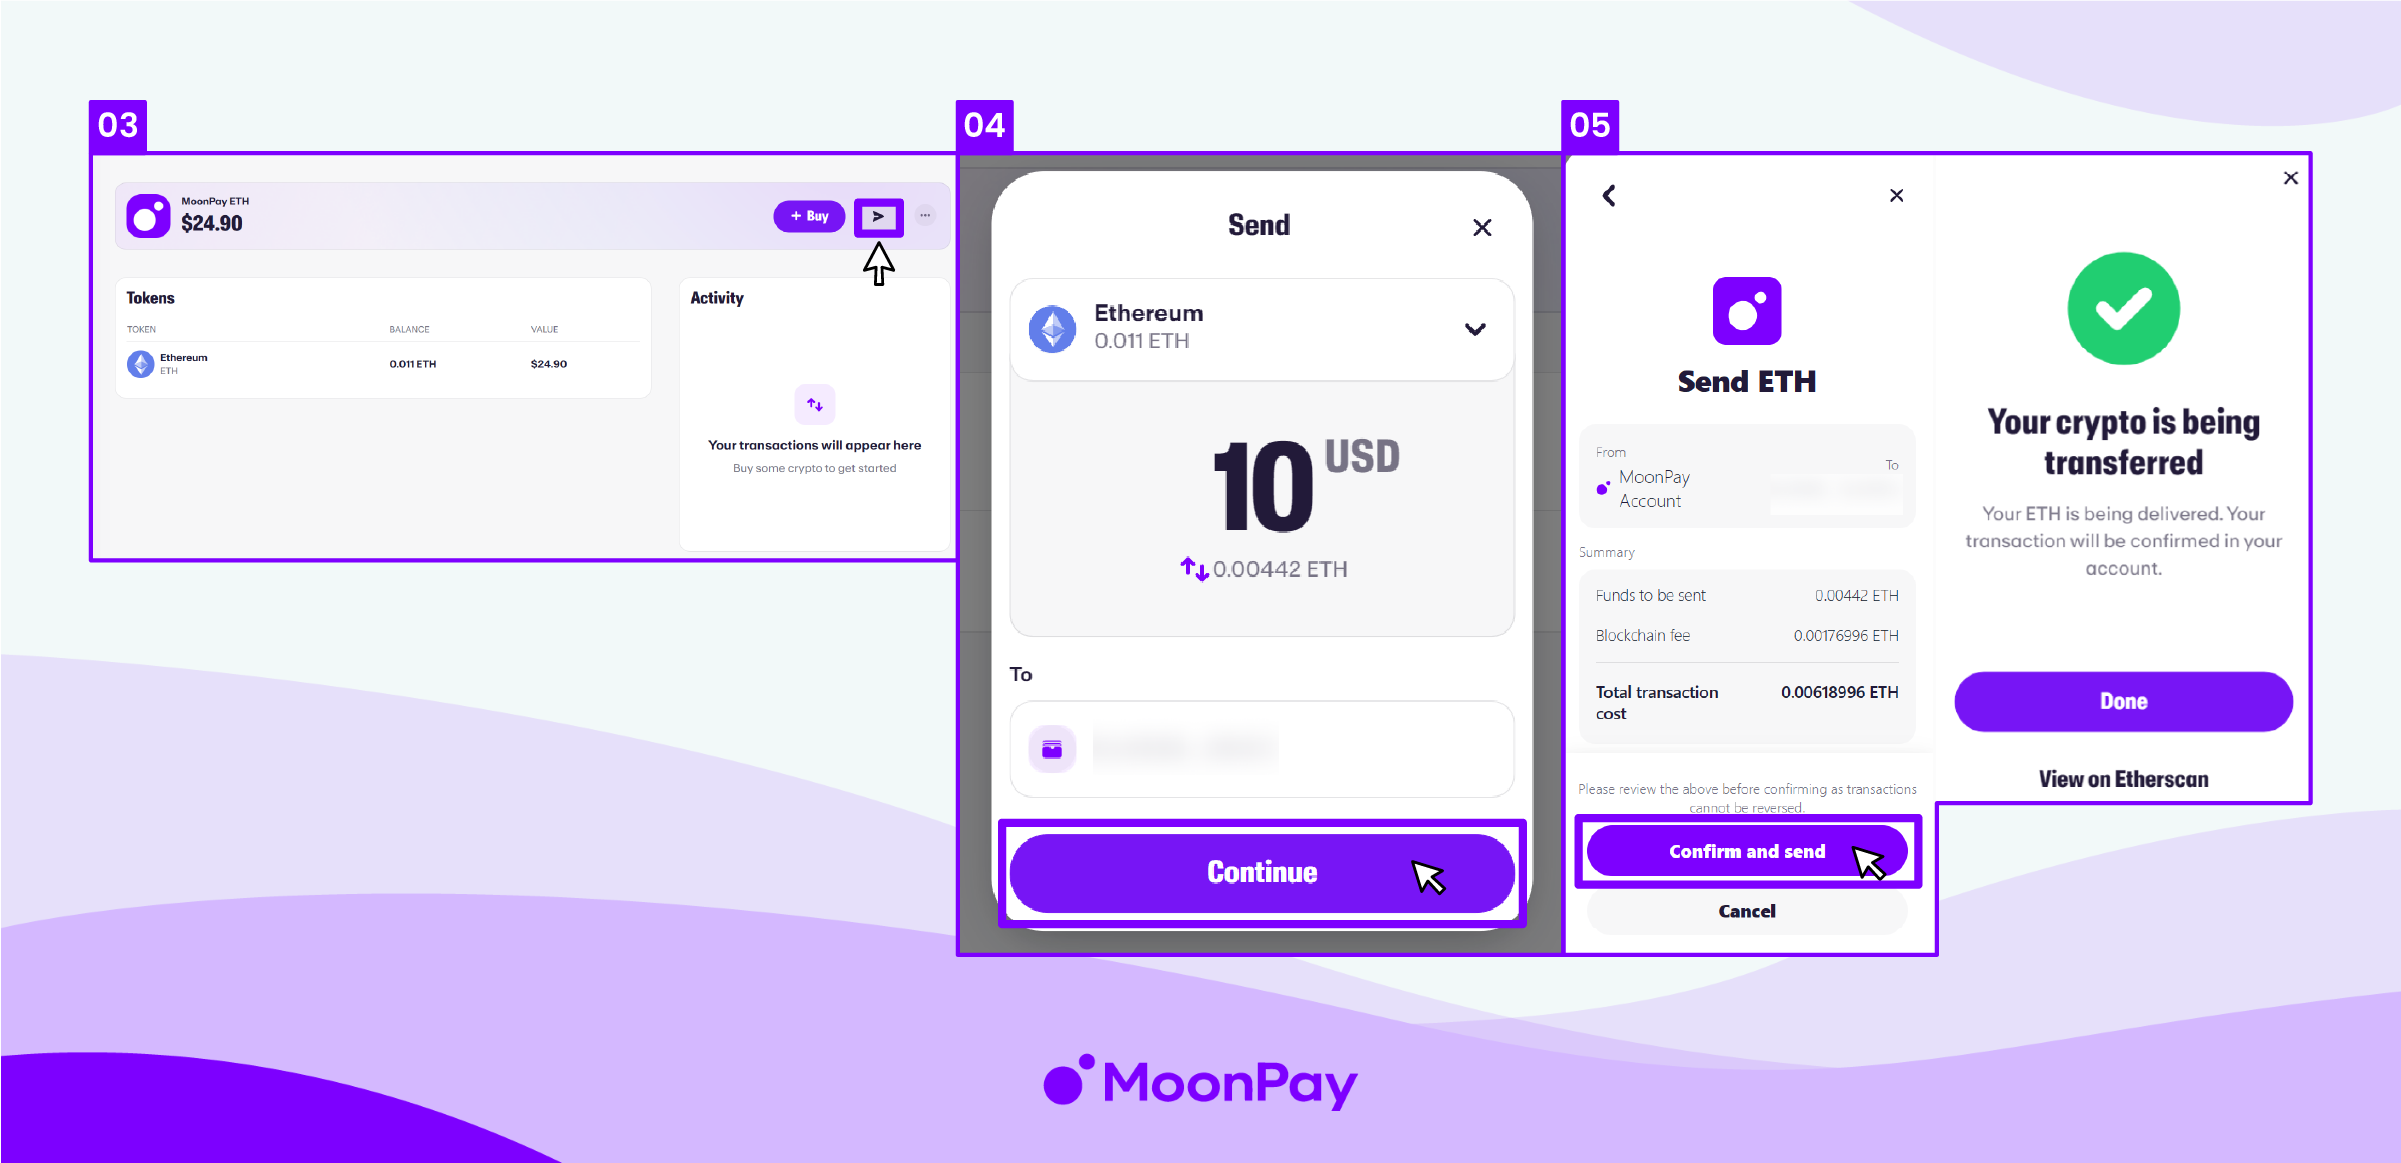 Steps 3-5 on MoonPay's website on how to send crypto.